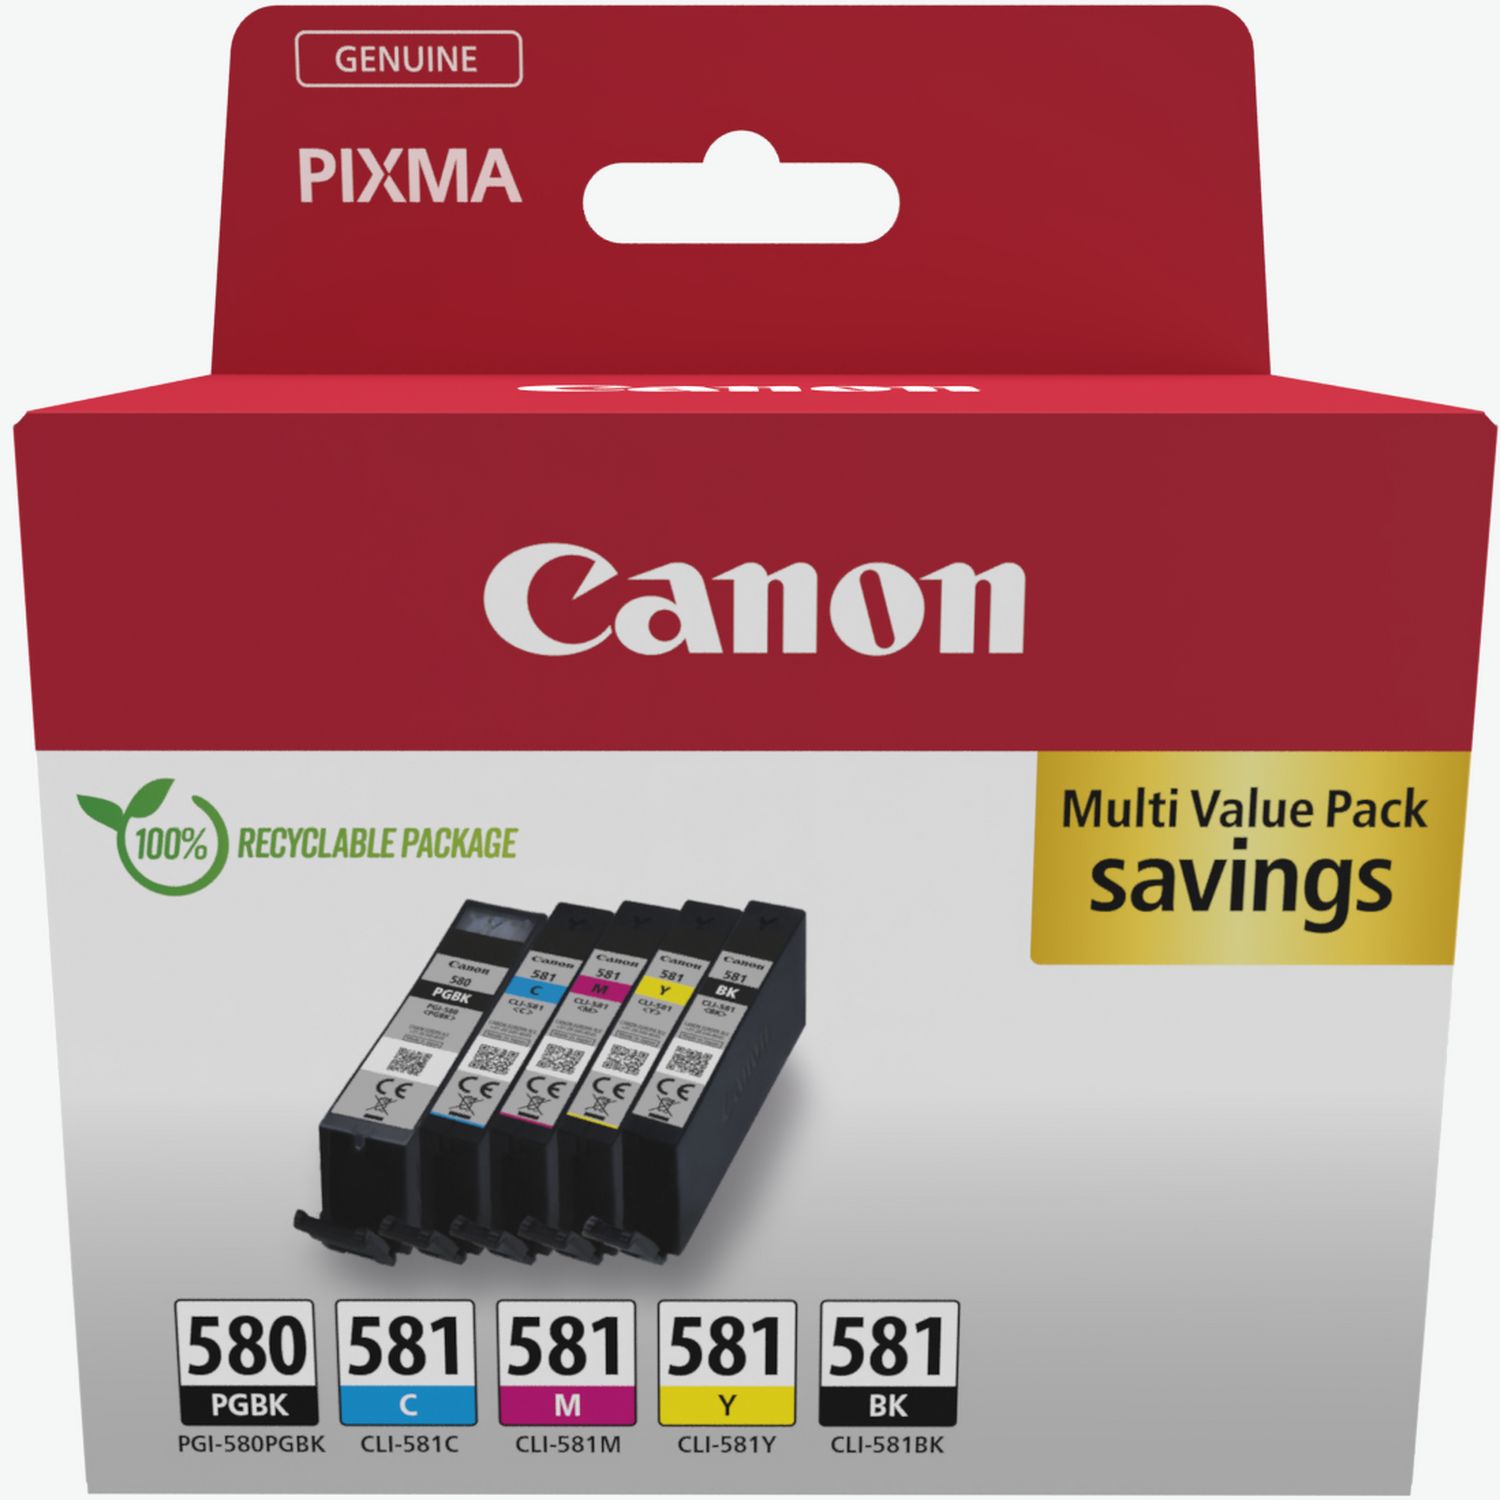 Refillable Cartridges for Canon 580-581 Range of Printers 